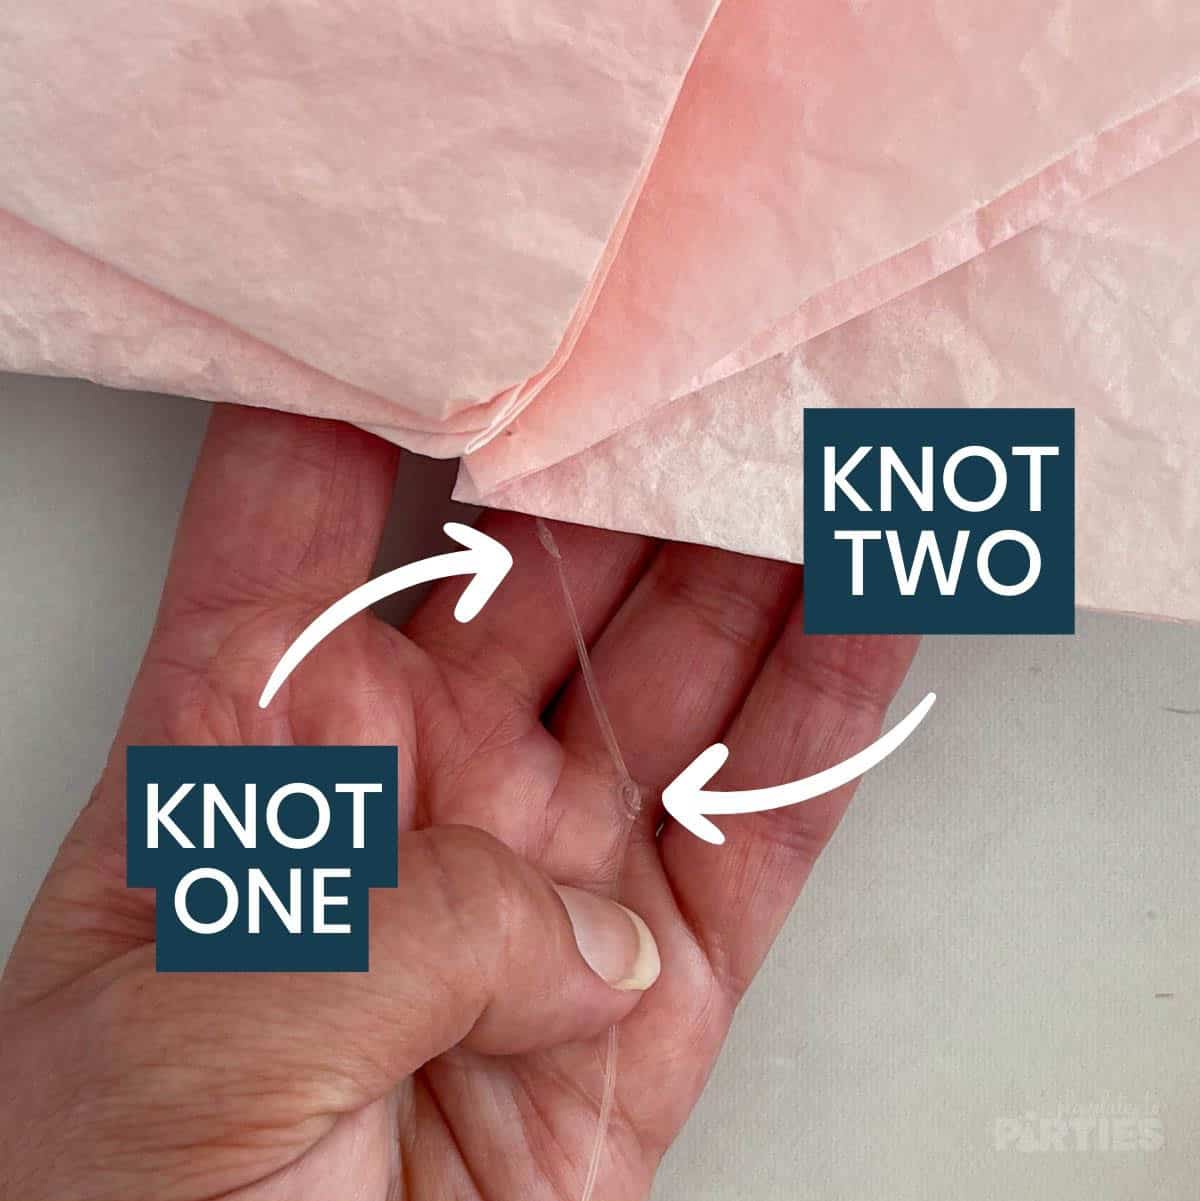 Knots one and two are pointed out after 4 coffee filters are threaded onto monofilament.